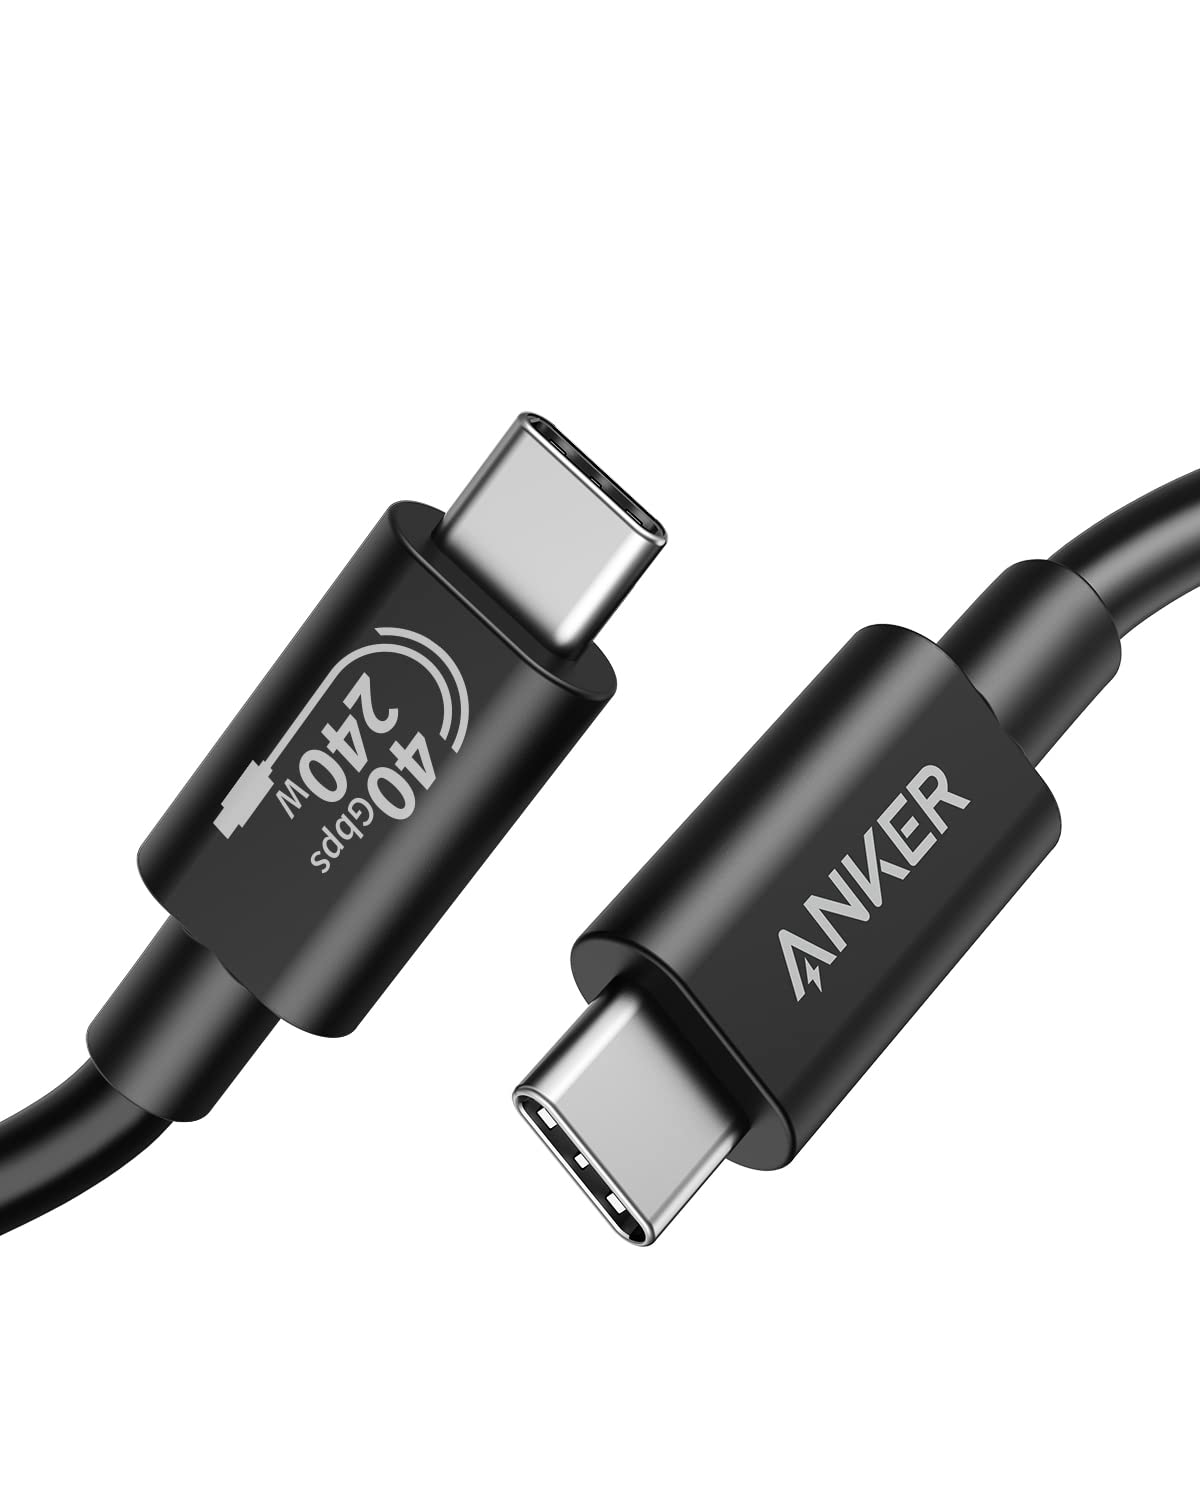 Anker 515 USB-C to USB-C Cable (USB4)